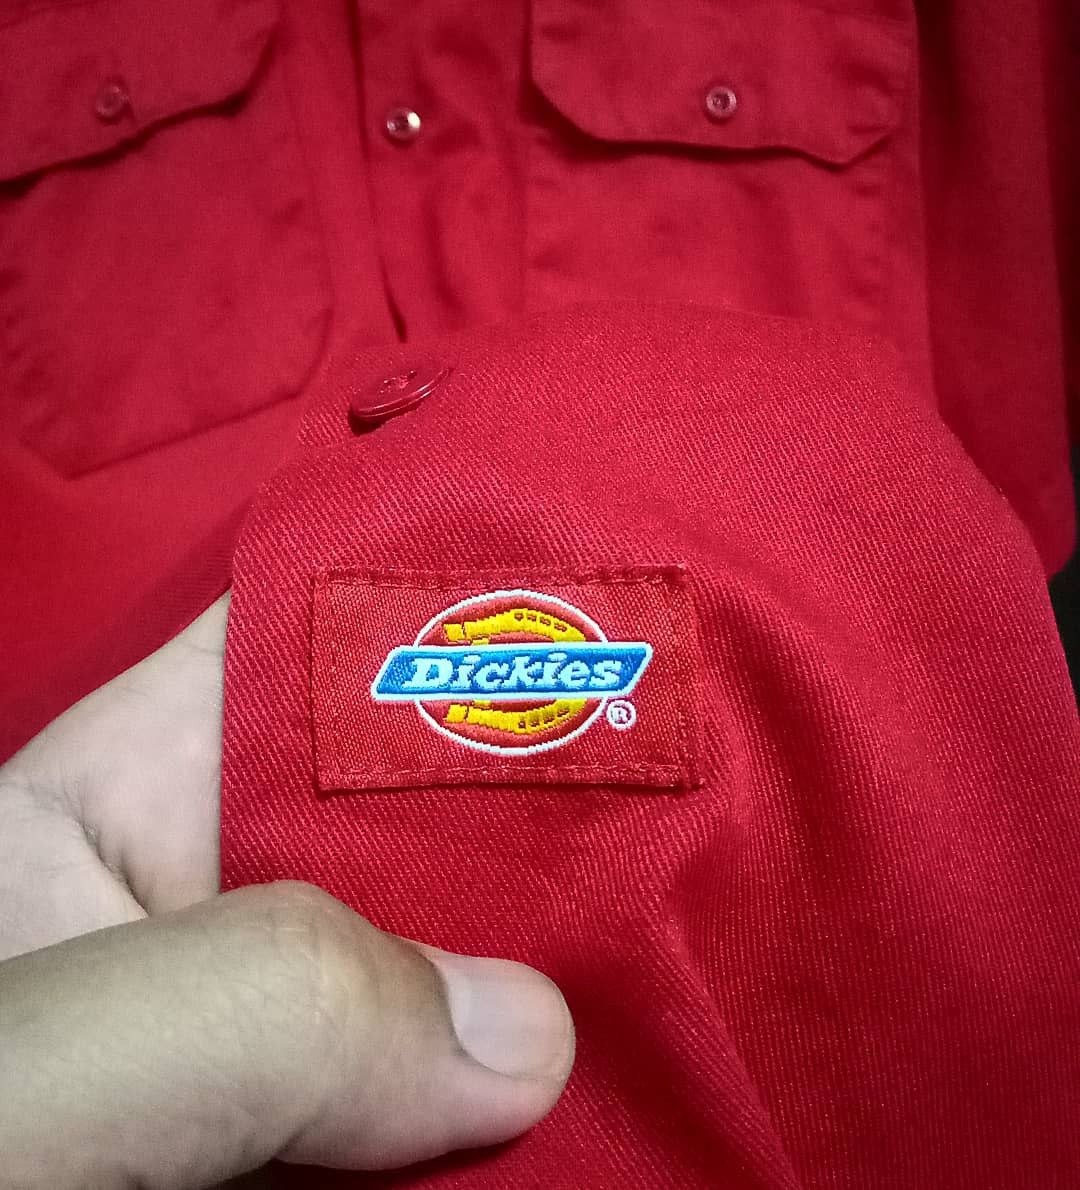 Vintage Vintage Dickies Workers Industrial shirts Engineer fashion Size US XL / EU 56 / 4 - 4 Preview